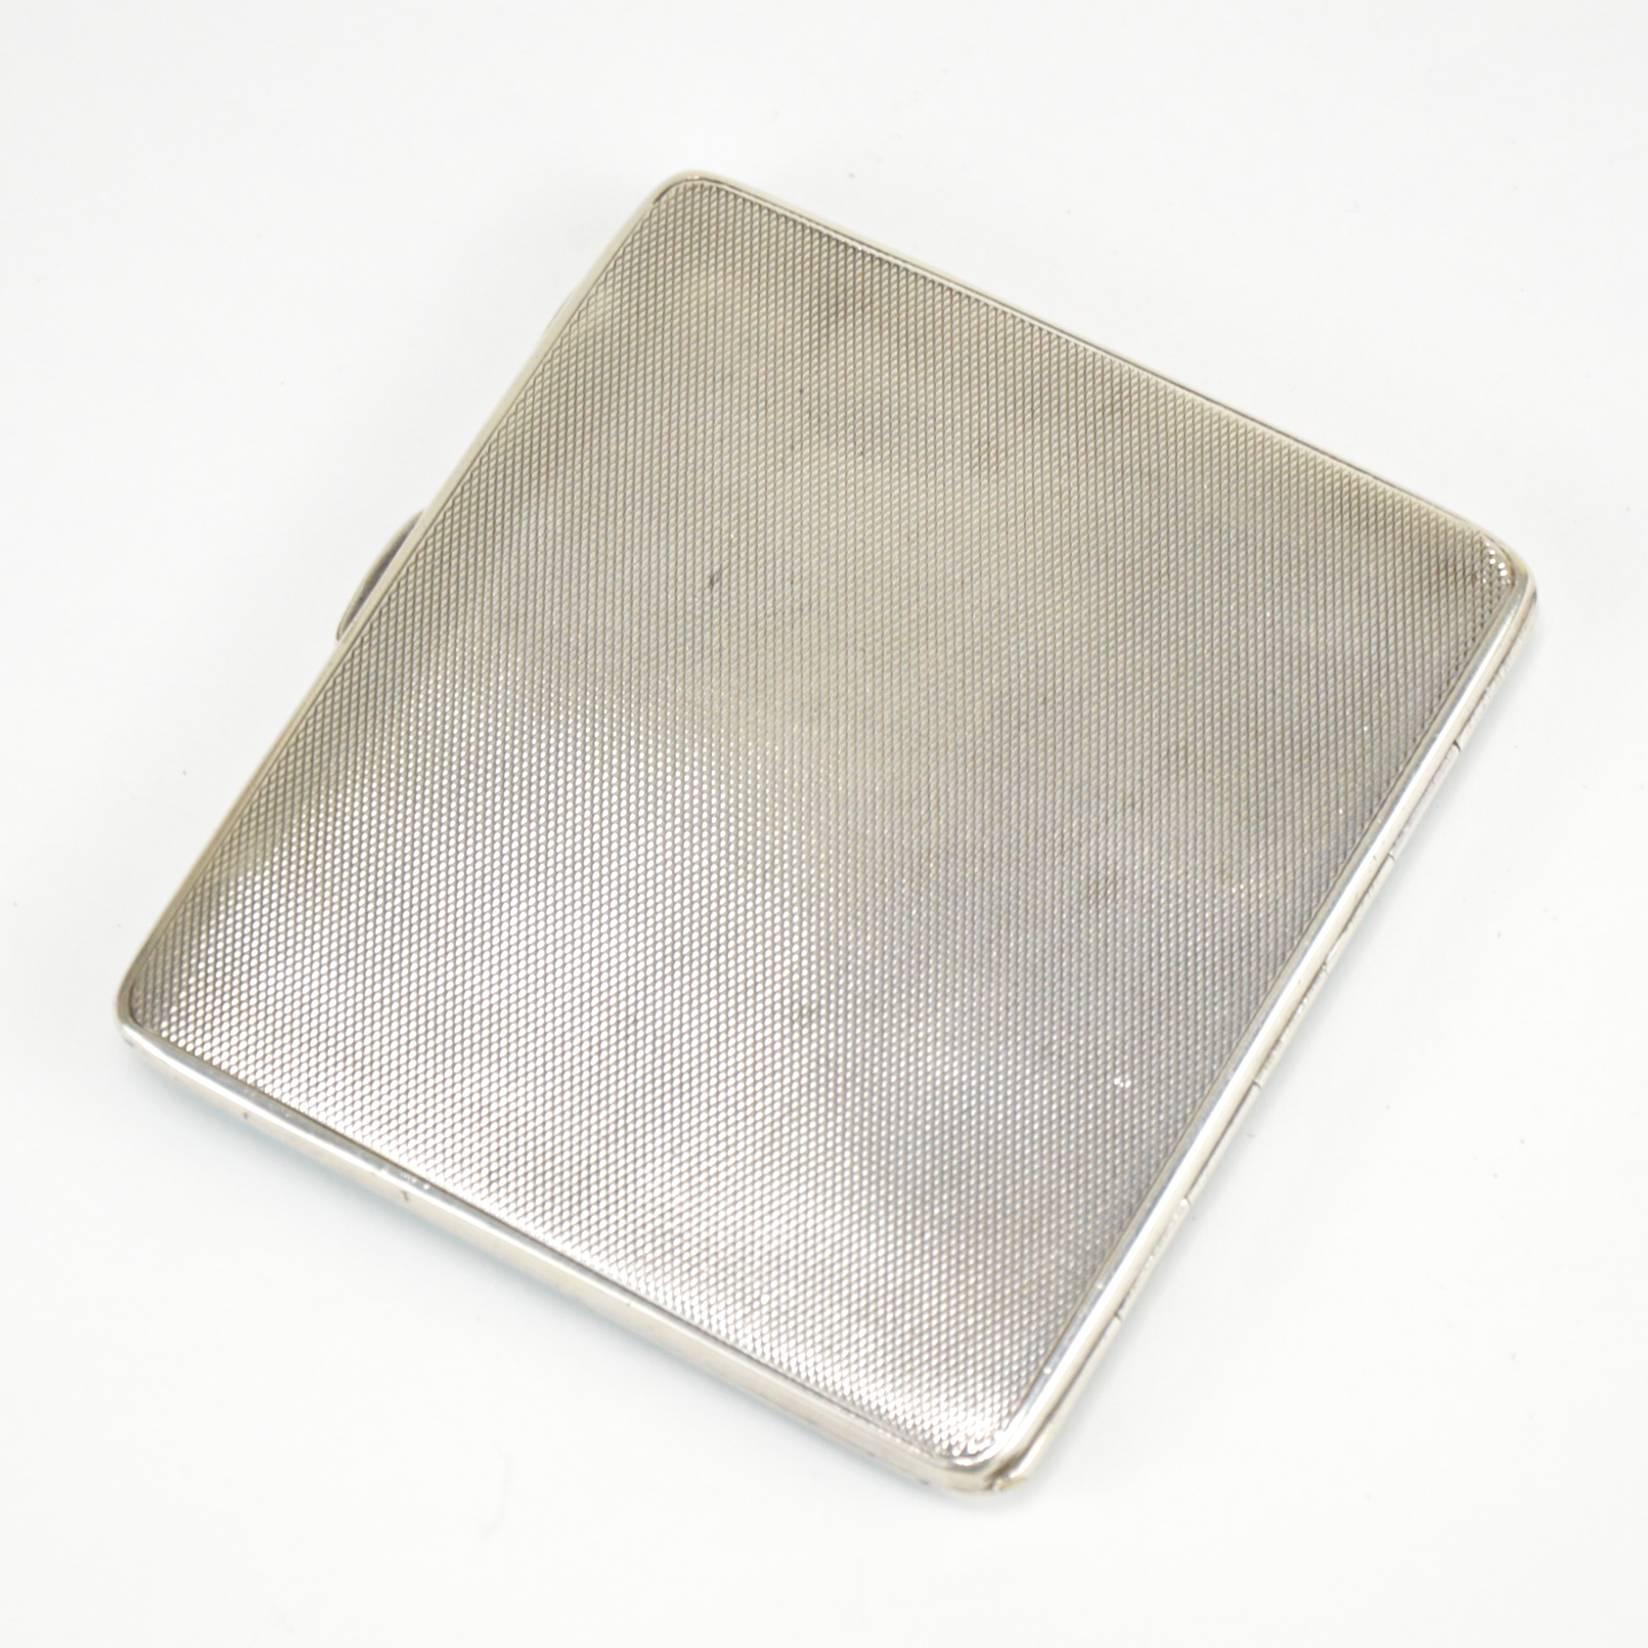 English sterling silver cigarette case. Light blue guilloché enamel, gilt inside.
Commemorative date engraved inside, 1935.
Dimensions: 9 x 8 cm.
Condition report: small chip in one corner (see the photos).
 